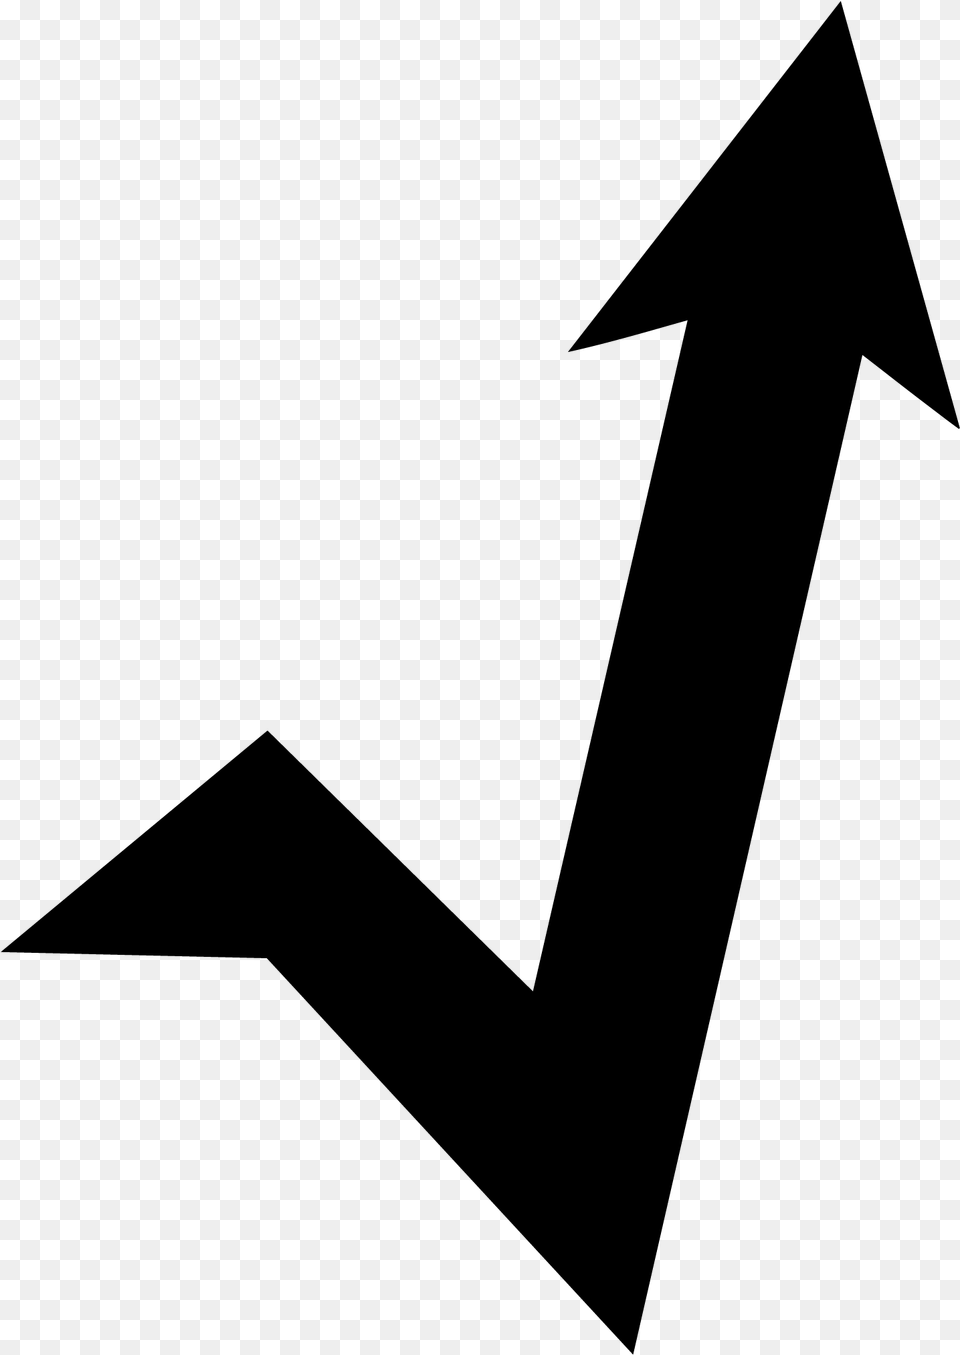 Elevating Arrow Wikimedia Commons, Gray Free Transparent Png